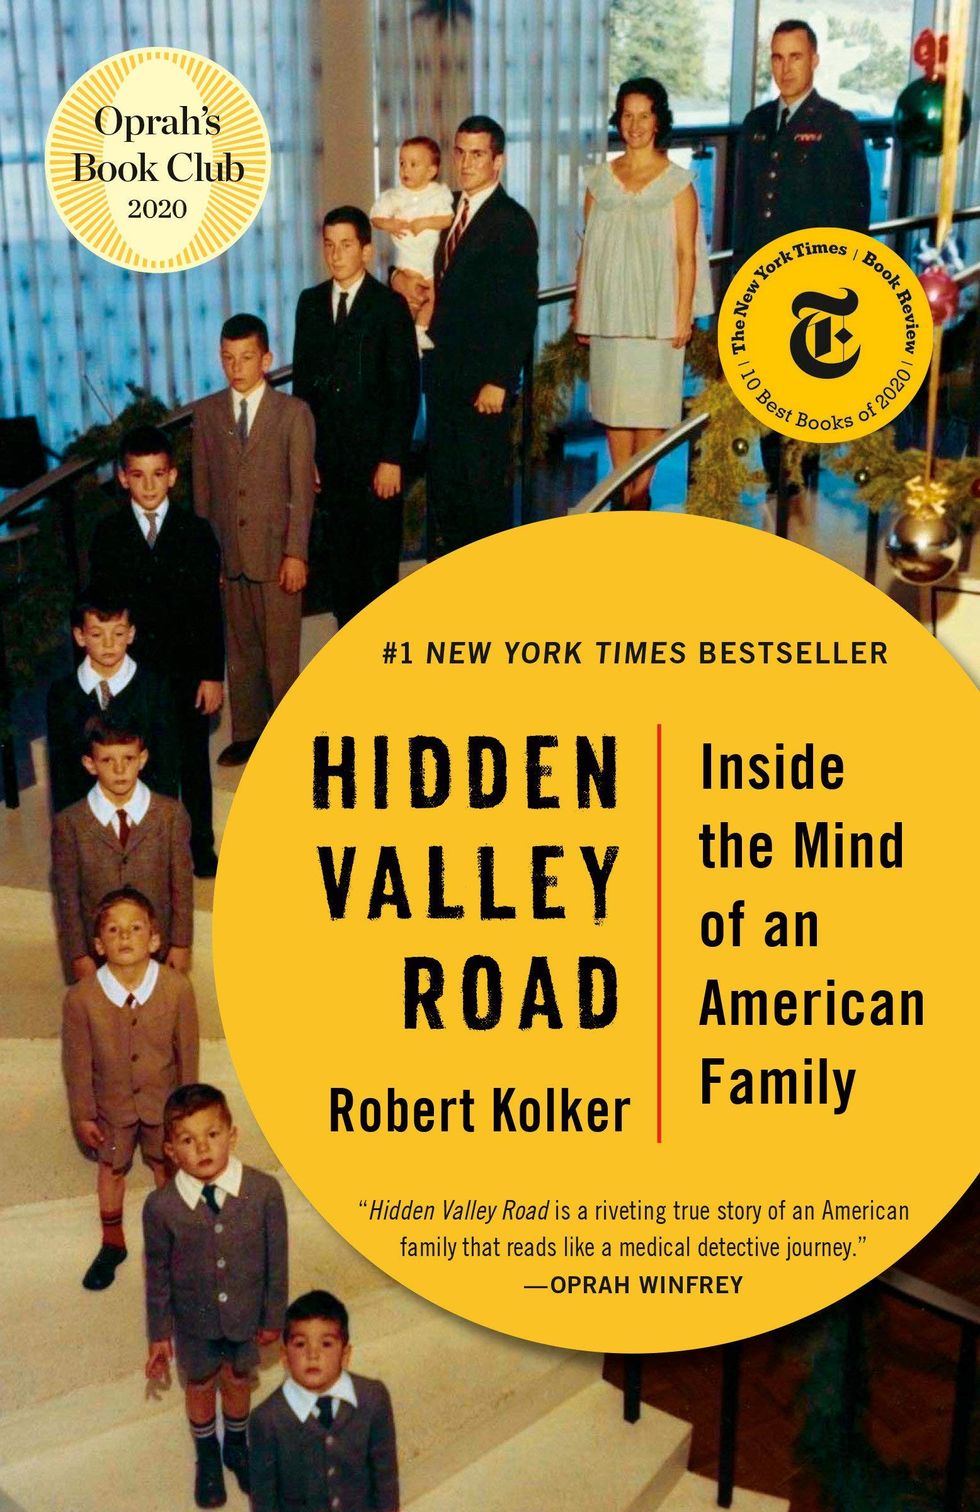 "Hidden Valley Road: Inside the Mind of an American Family" by Robert Kolker